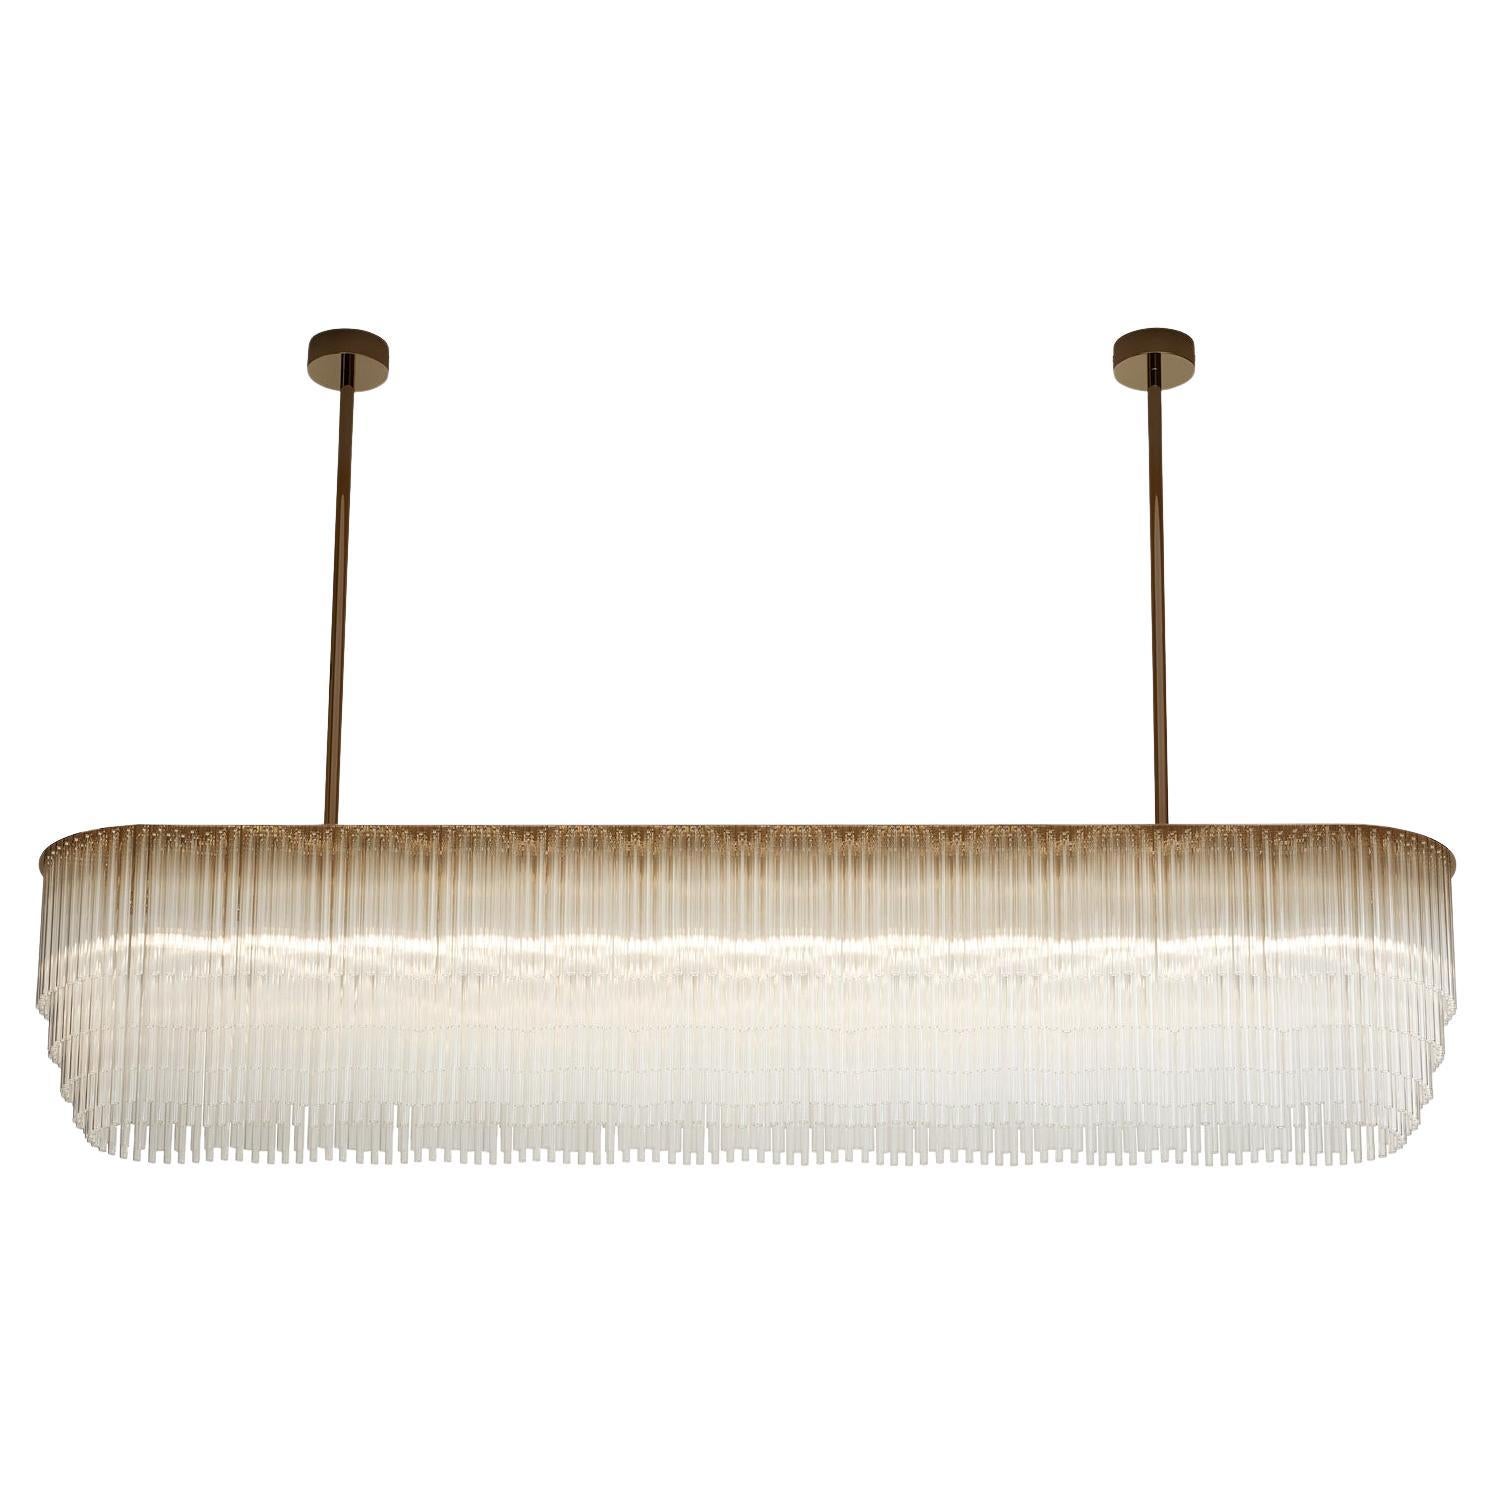 Linear Chandelier 1915mm / 75.25" in Brass-based Bronze and Tiered Glass Profile For Sale